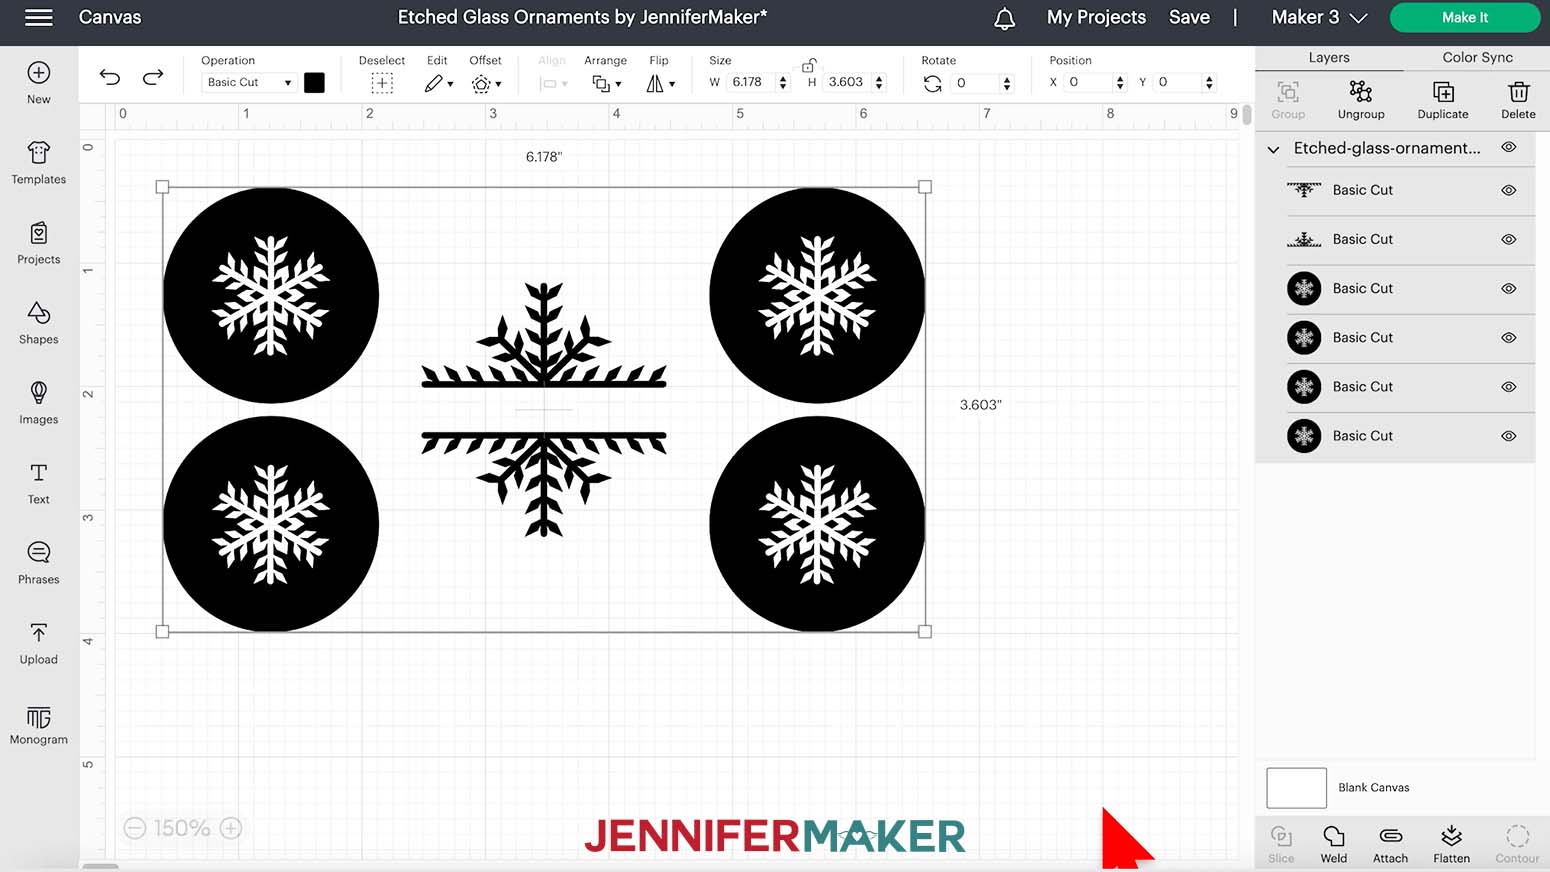 A screenshot of the Cricut Design Space canvas showing the etched glass ornament snowflake design at 6.178 inches wide by 3.603 inches tall